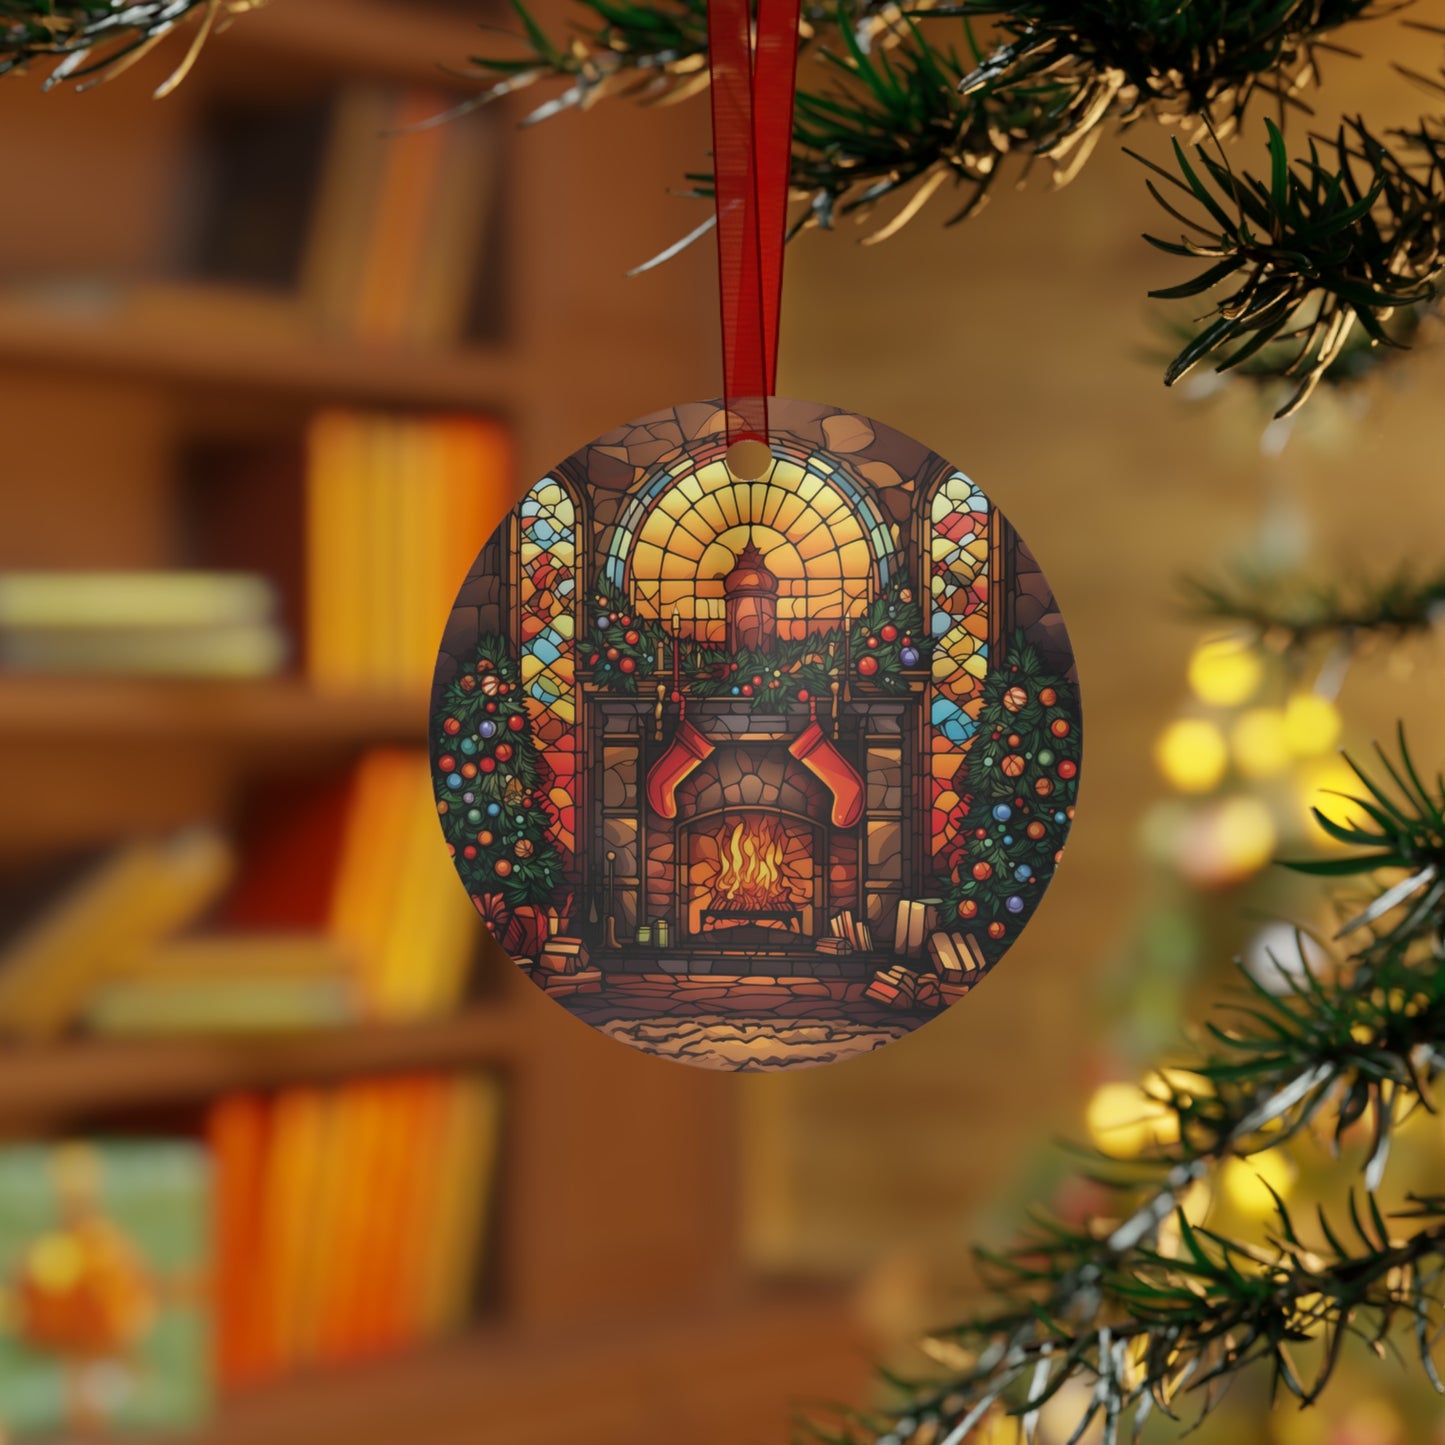 Cozy Christmas Fireplace Stained Glass Style Ornament Lightweight Shaterproof Metal Ornaments Christmas Ornament Exchange Decoration Gift